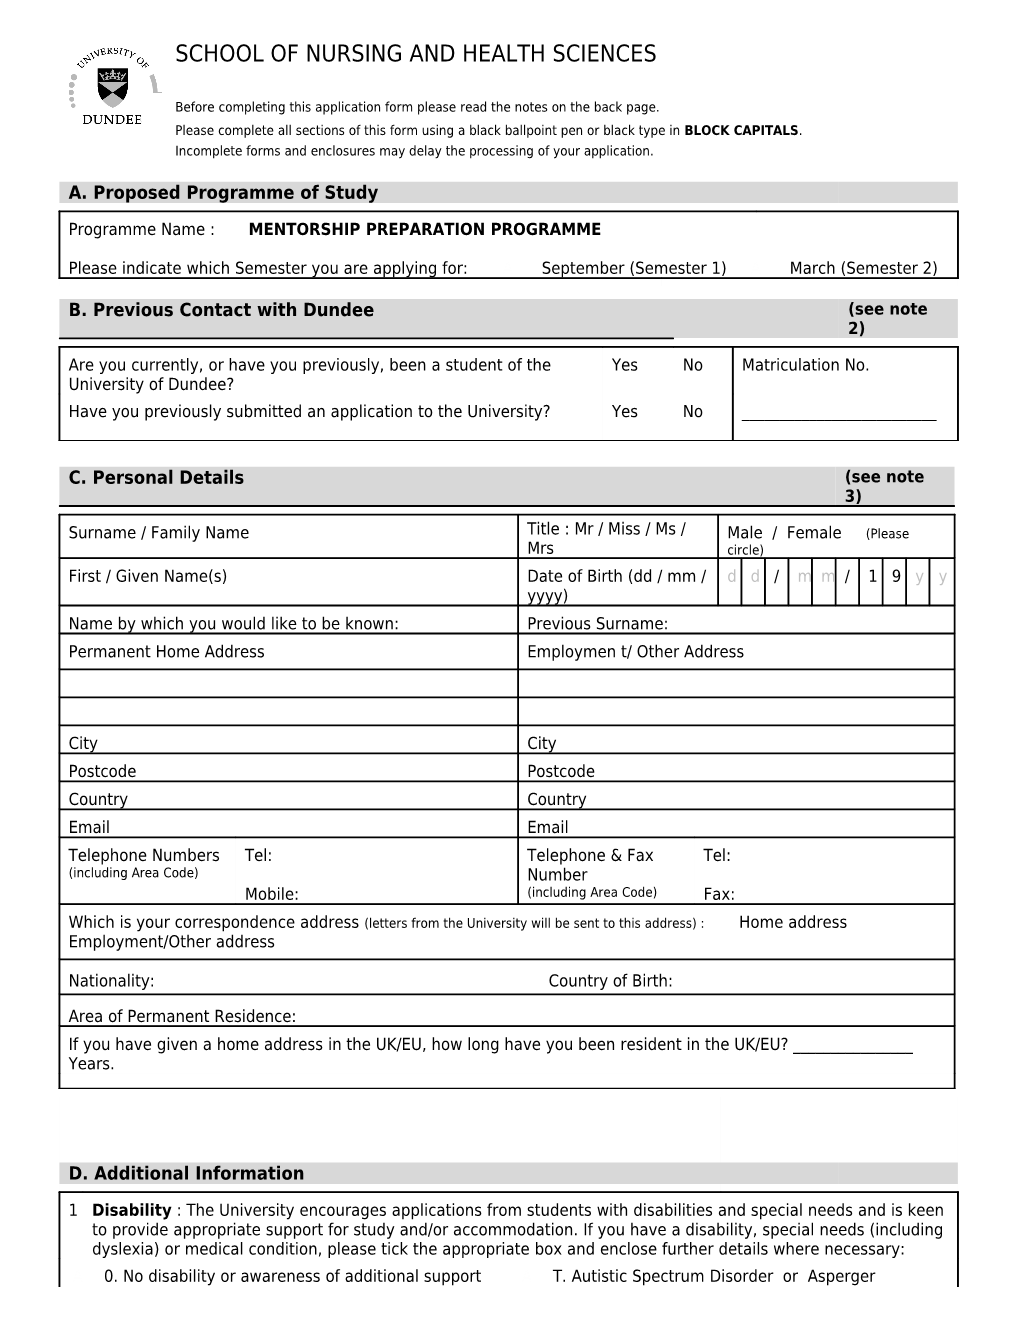 Before Completing This Application Form Please Read the Notes on the Back Page